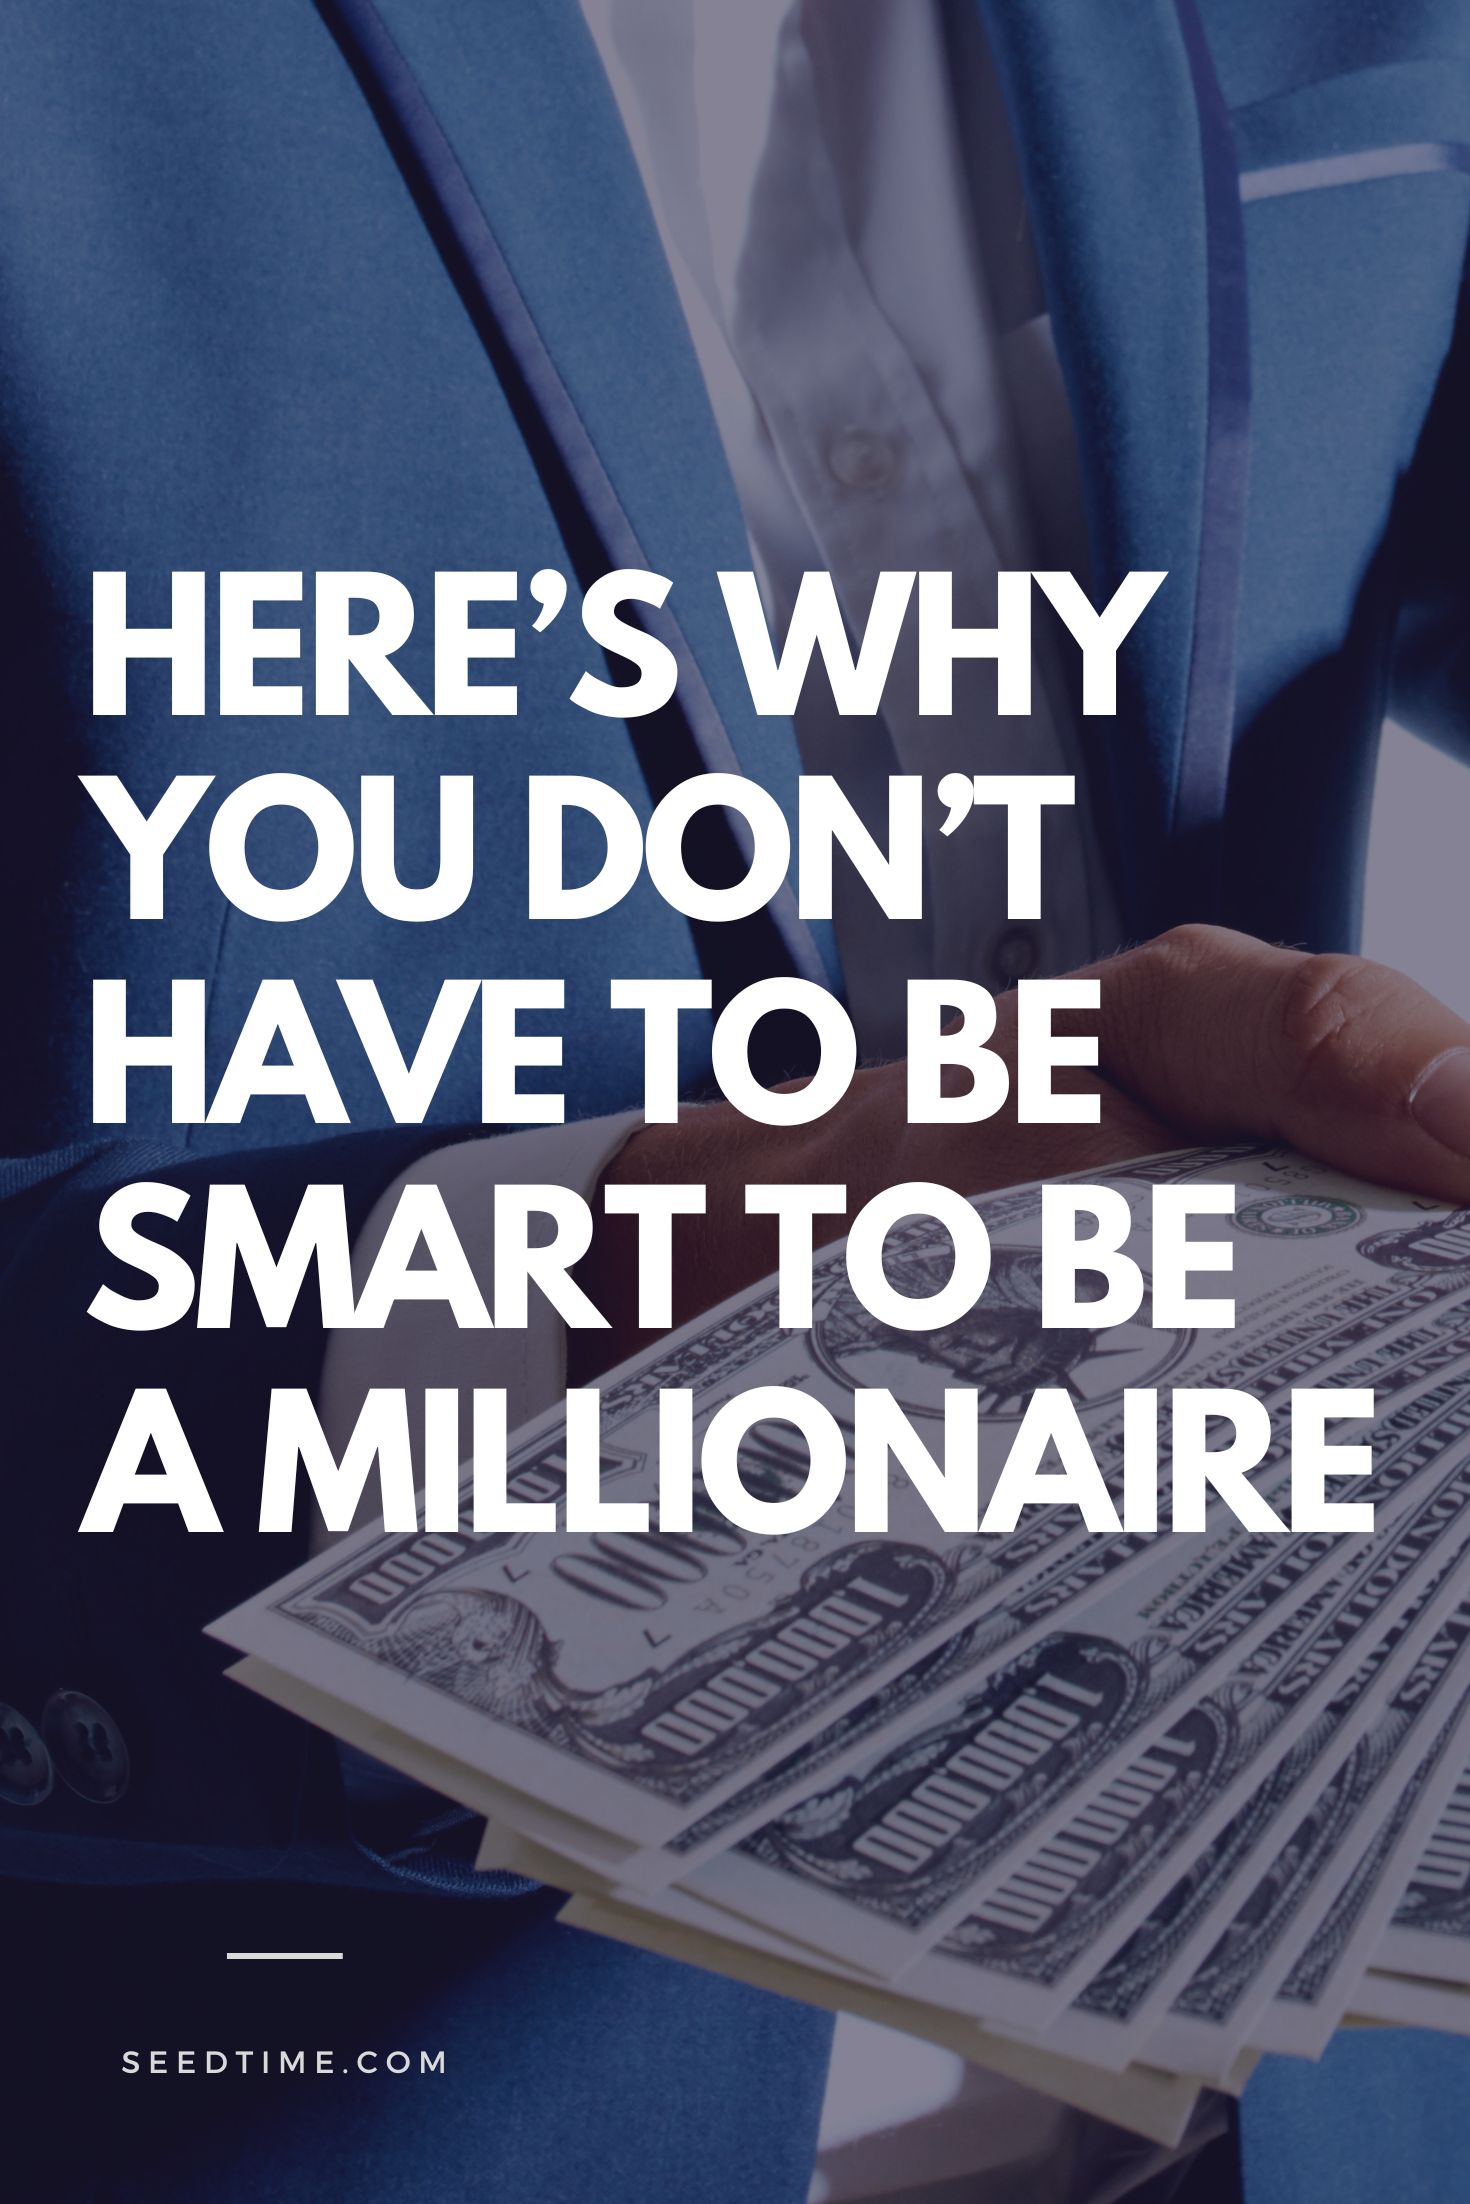 You don't have to be smart to be a millionaire - here's why